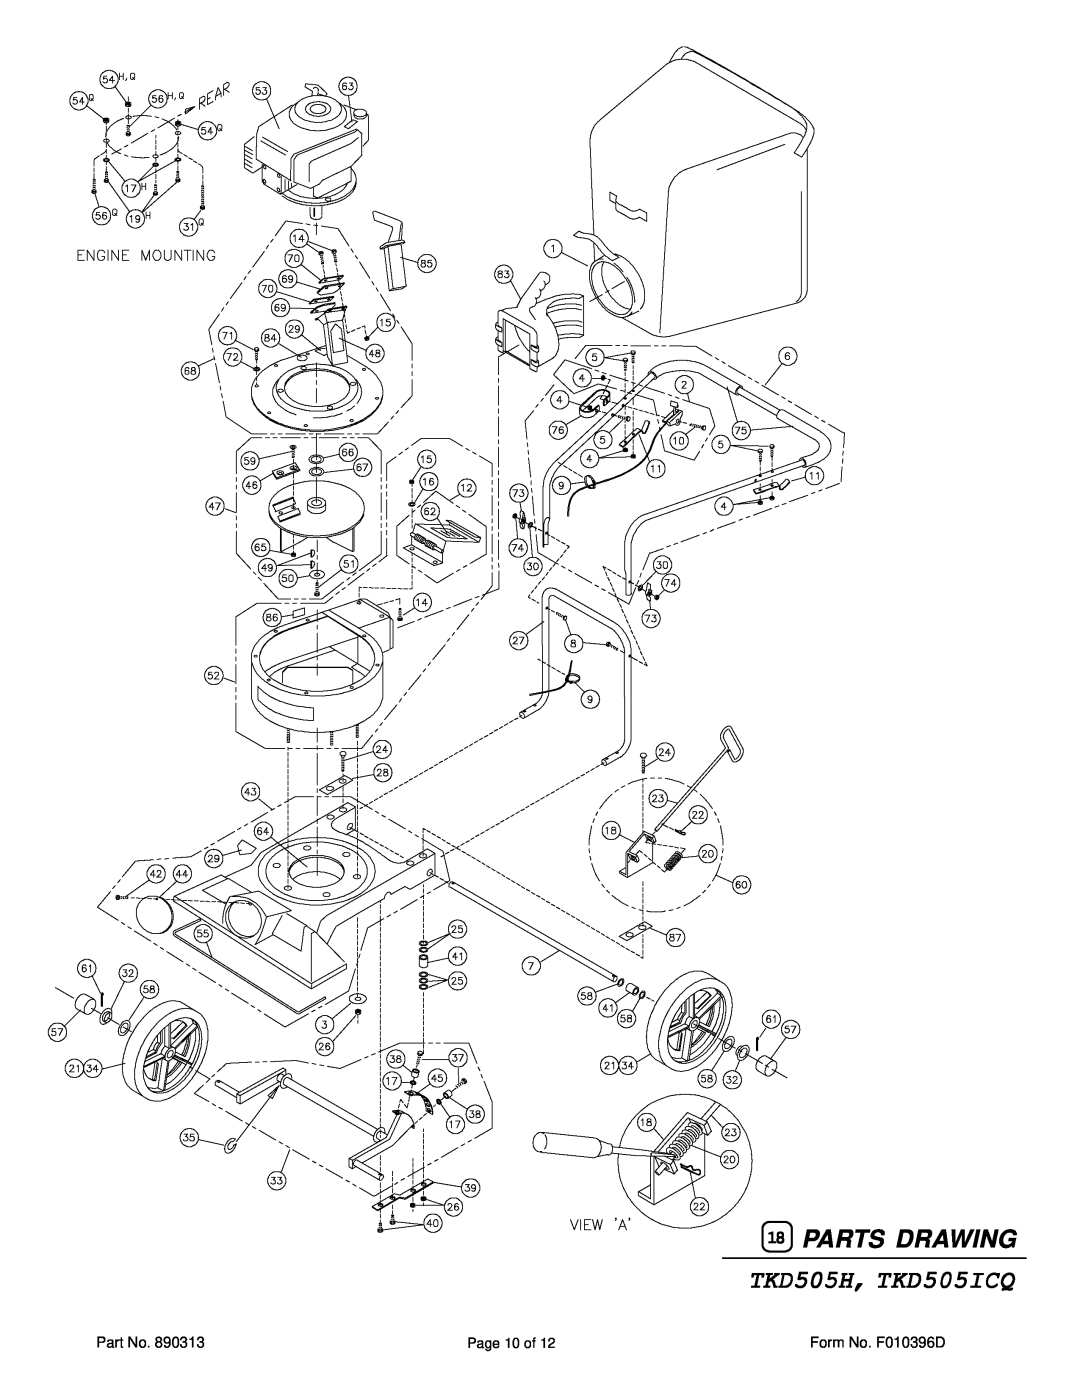 Billy Goat TKD505H, TKD505ICQ specifications Parts Drawing 